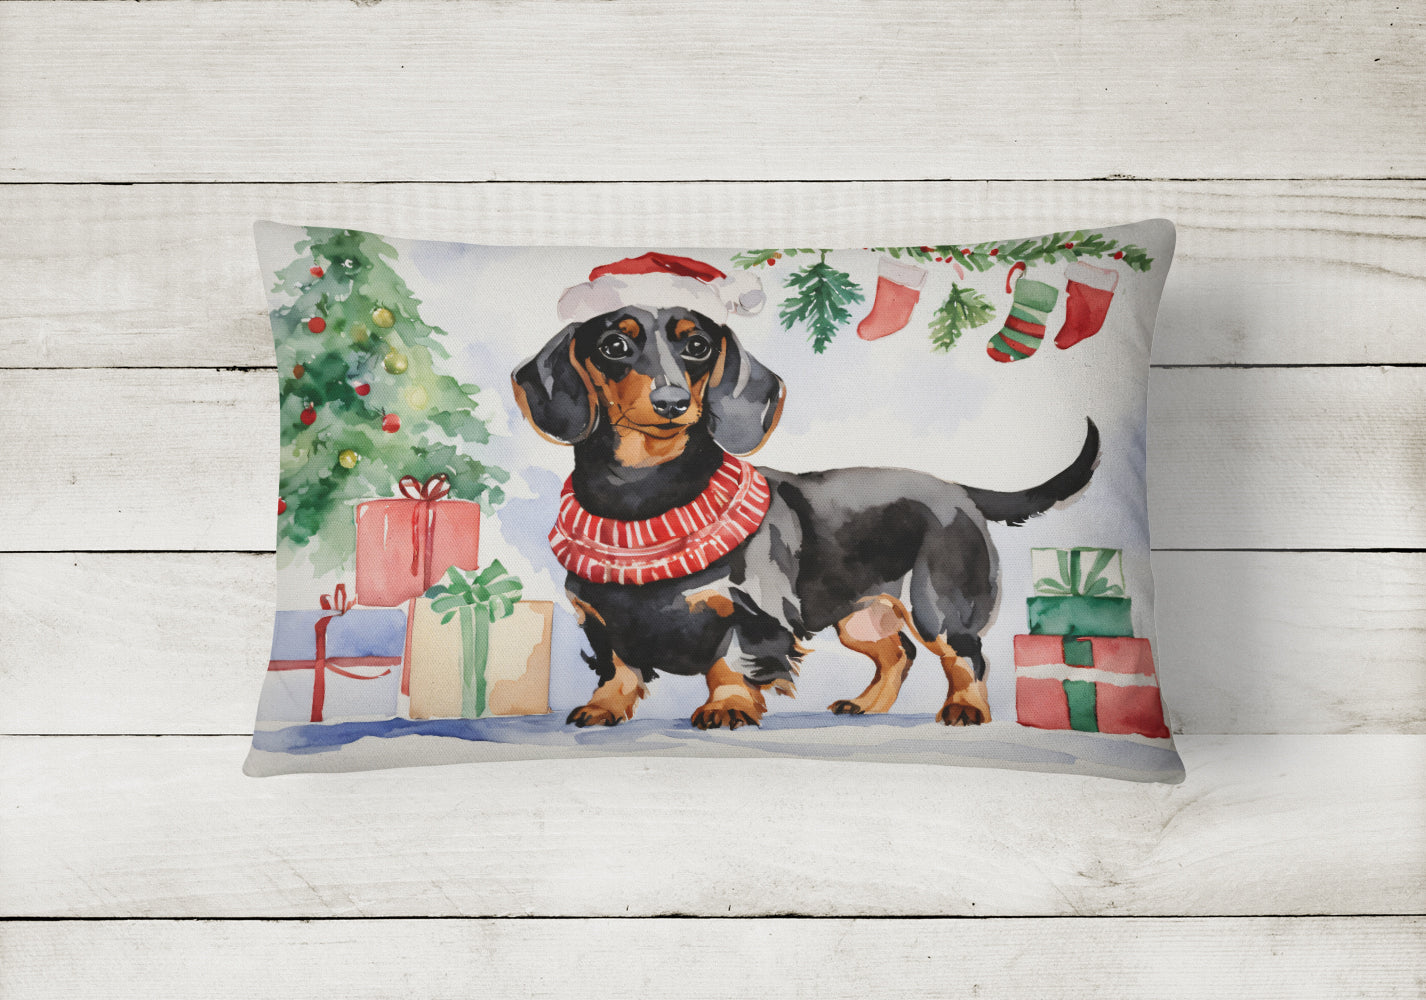 Buy this Black and Tan Dachshund Christmas Fabric Decorative Pillow